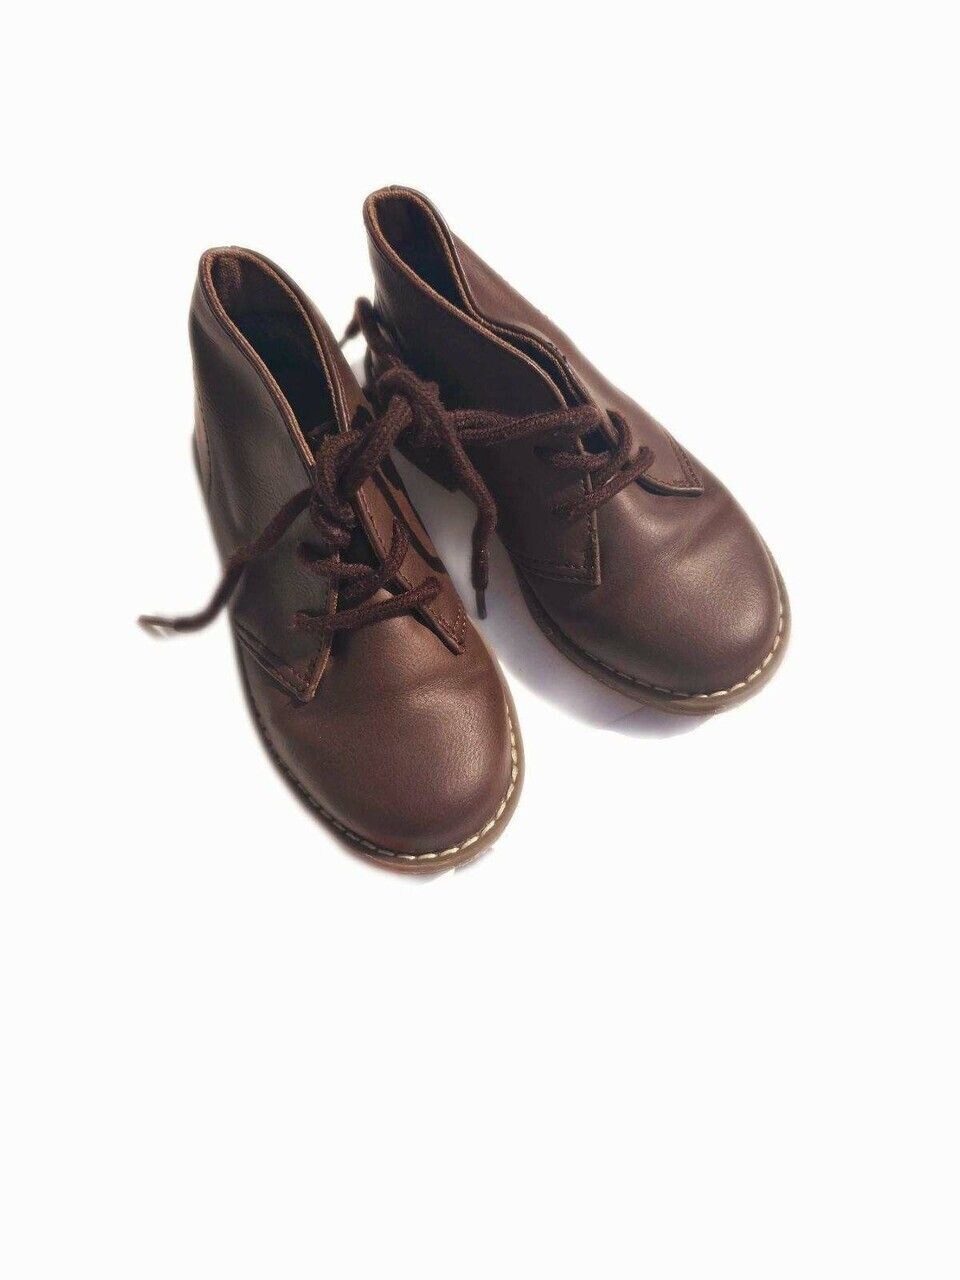 ​The Children's Place Boys Lace Up Brown Boots